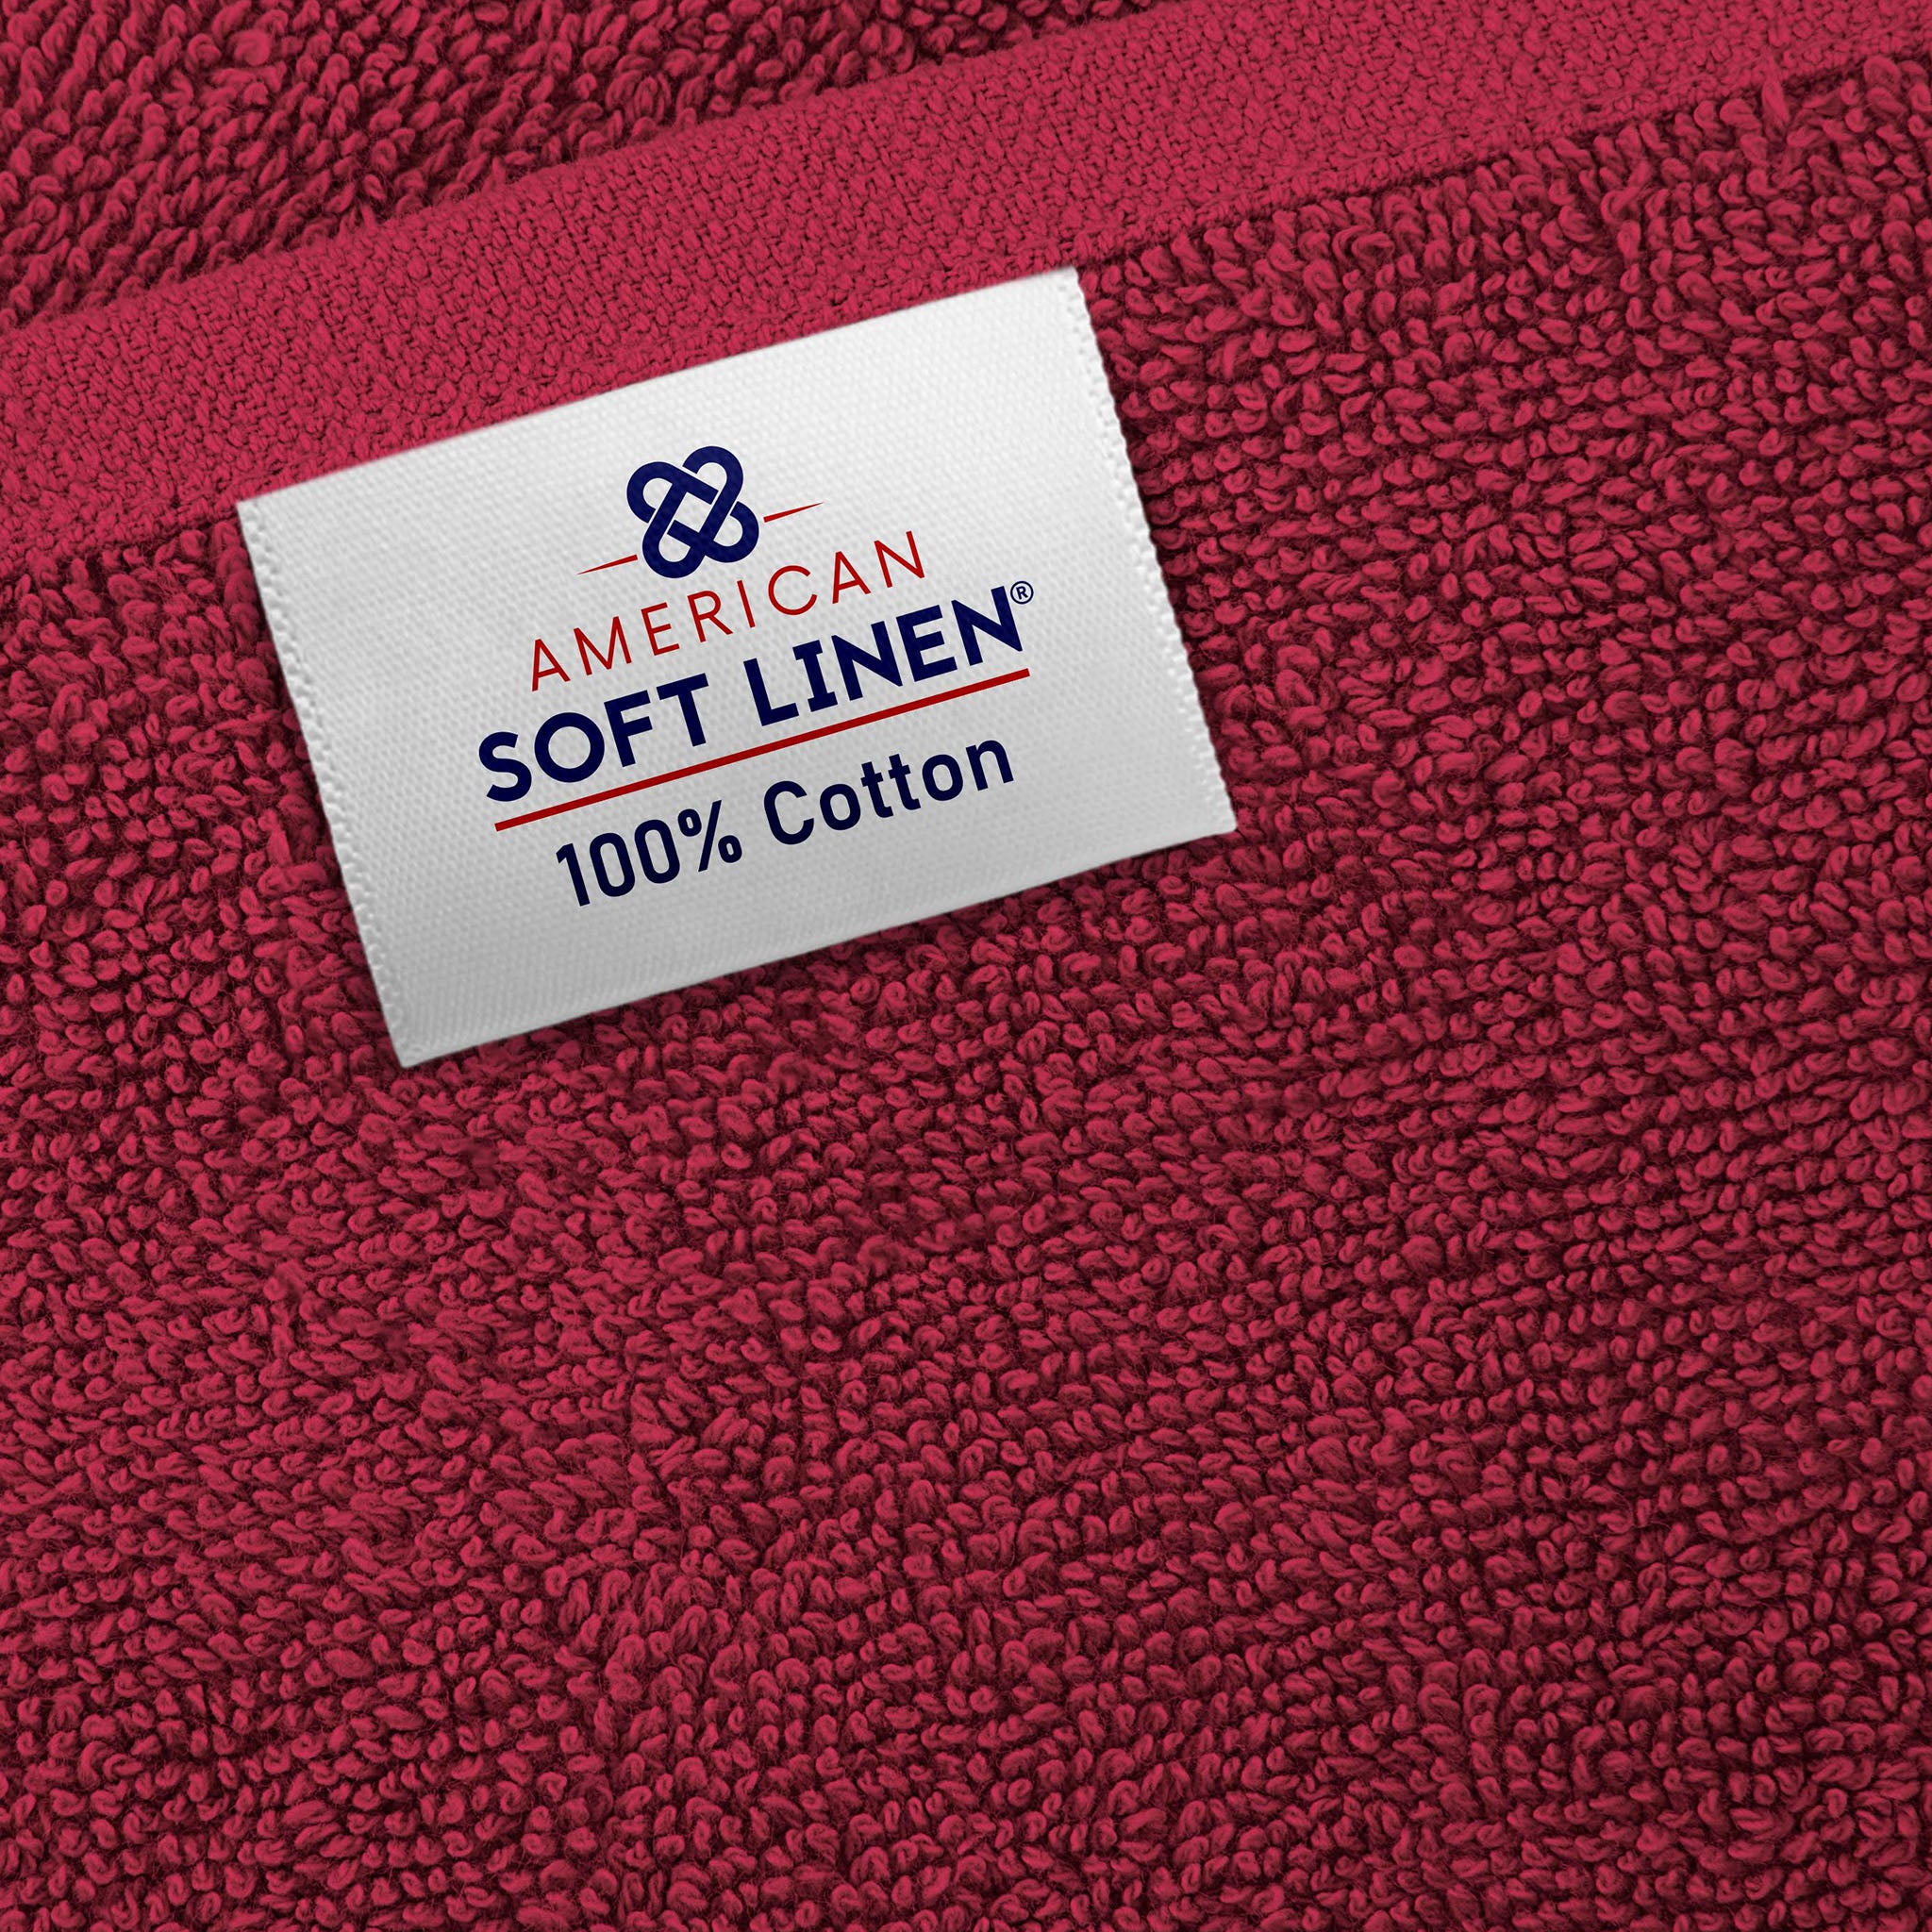 American Soft Linen 100% Ring Spun Cotton 40x80 Inches Oversized Bath Sheets bordeaux-red-6